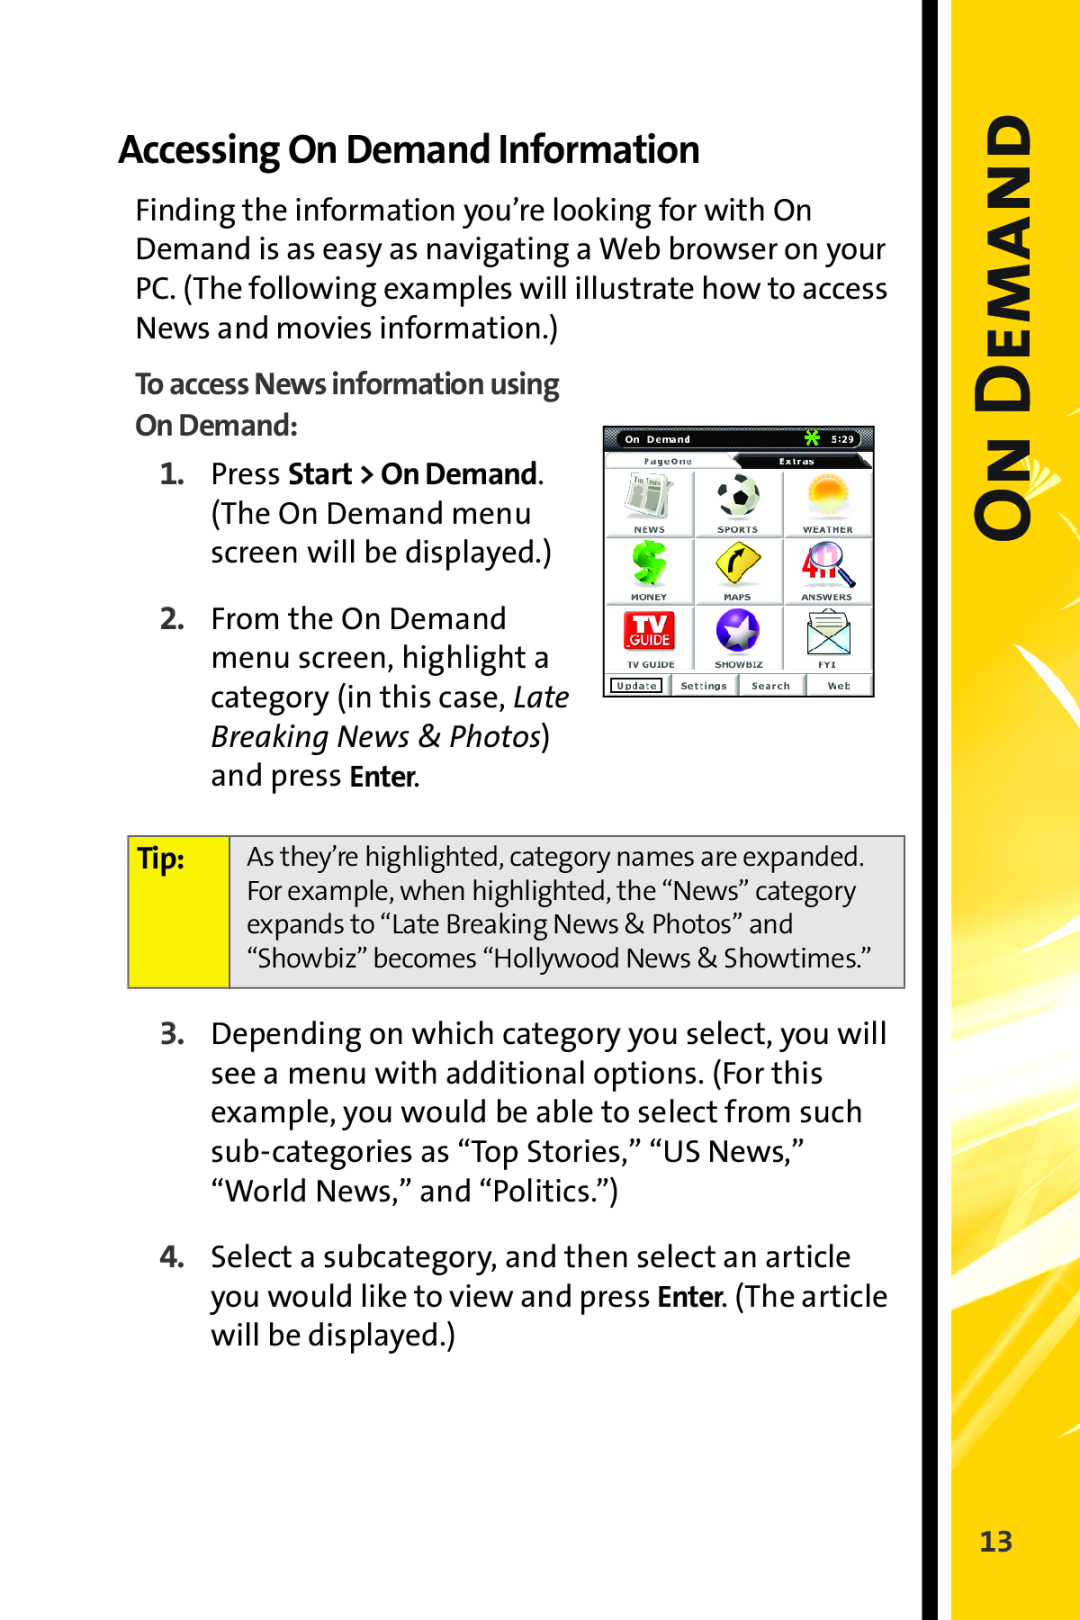 Sprint Nextel Stereo Receiver manual Accessing On Demand Information, To access News information using On Demand 